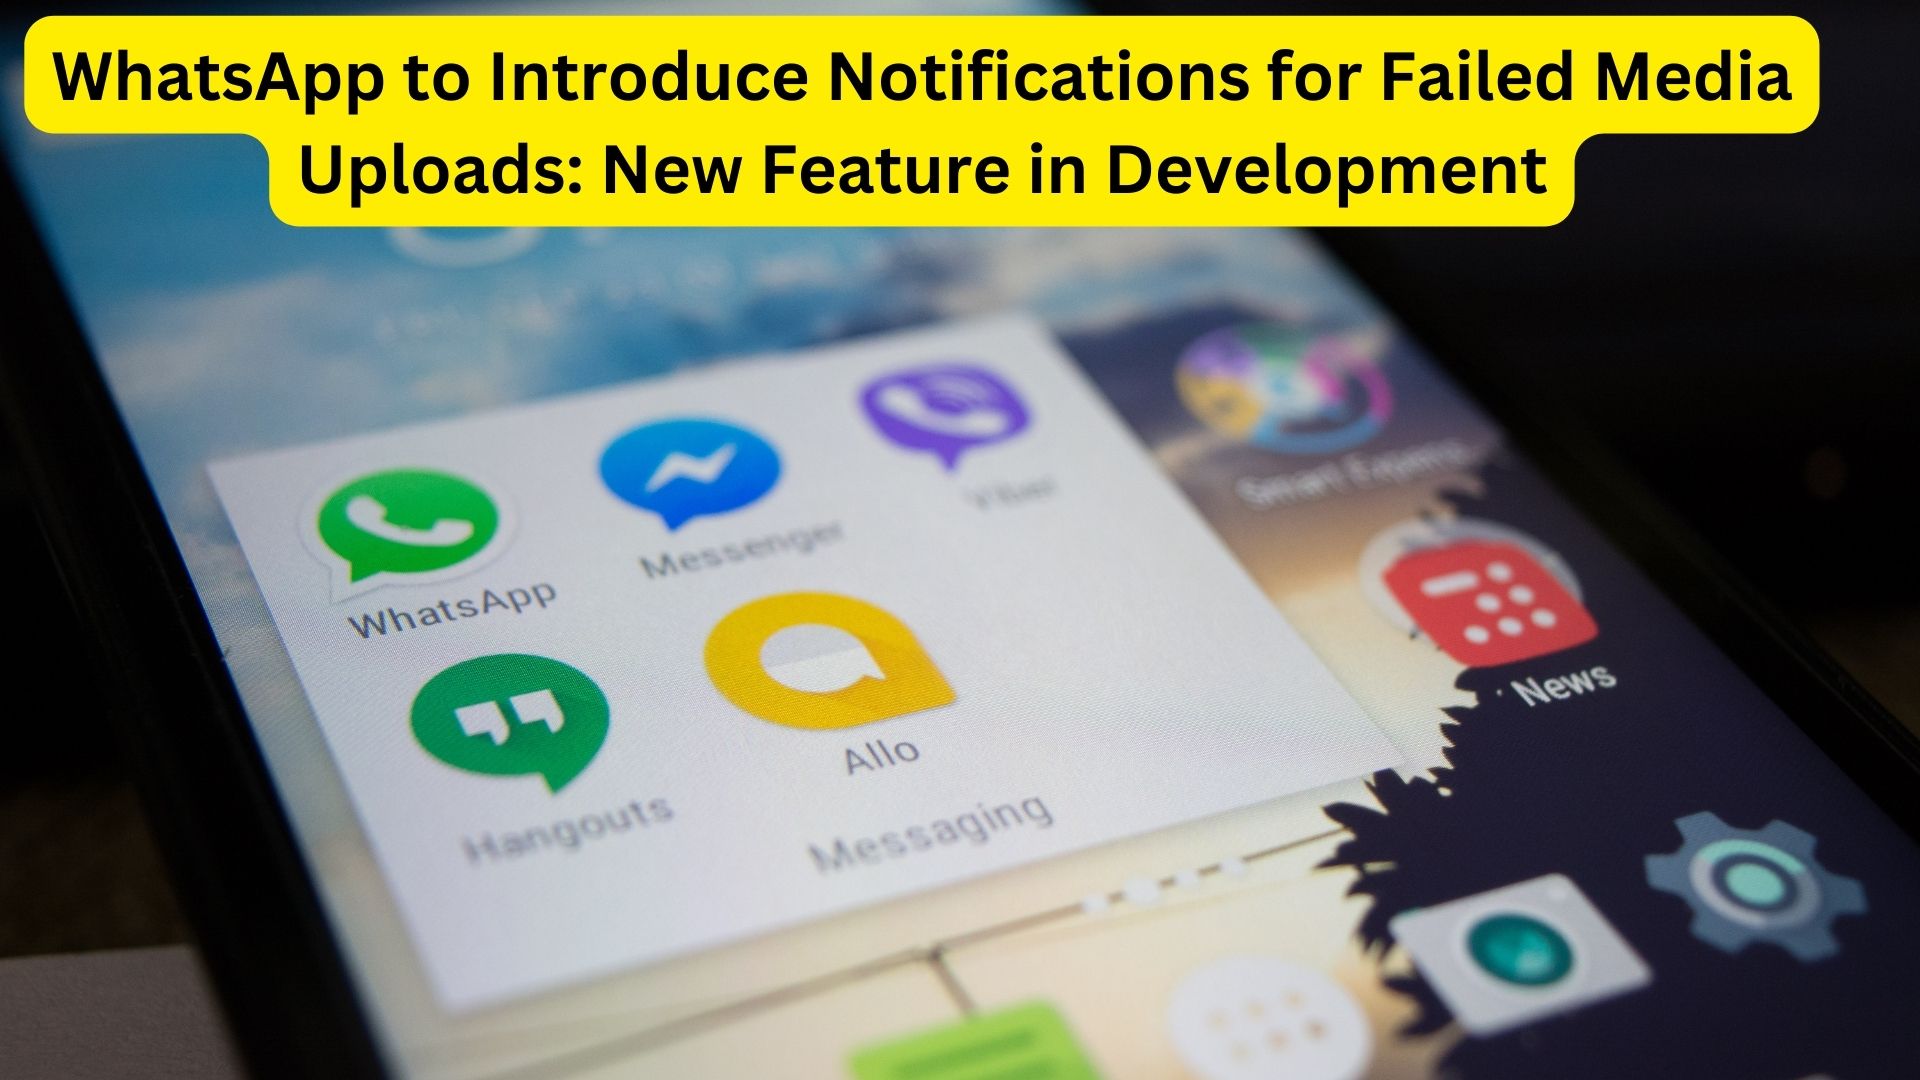 WhatsApp to Introduce Notifications for Failed Media Uploads: New Feature in Development